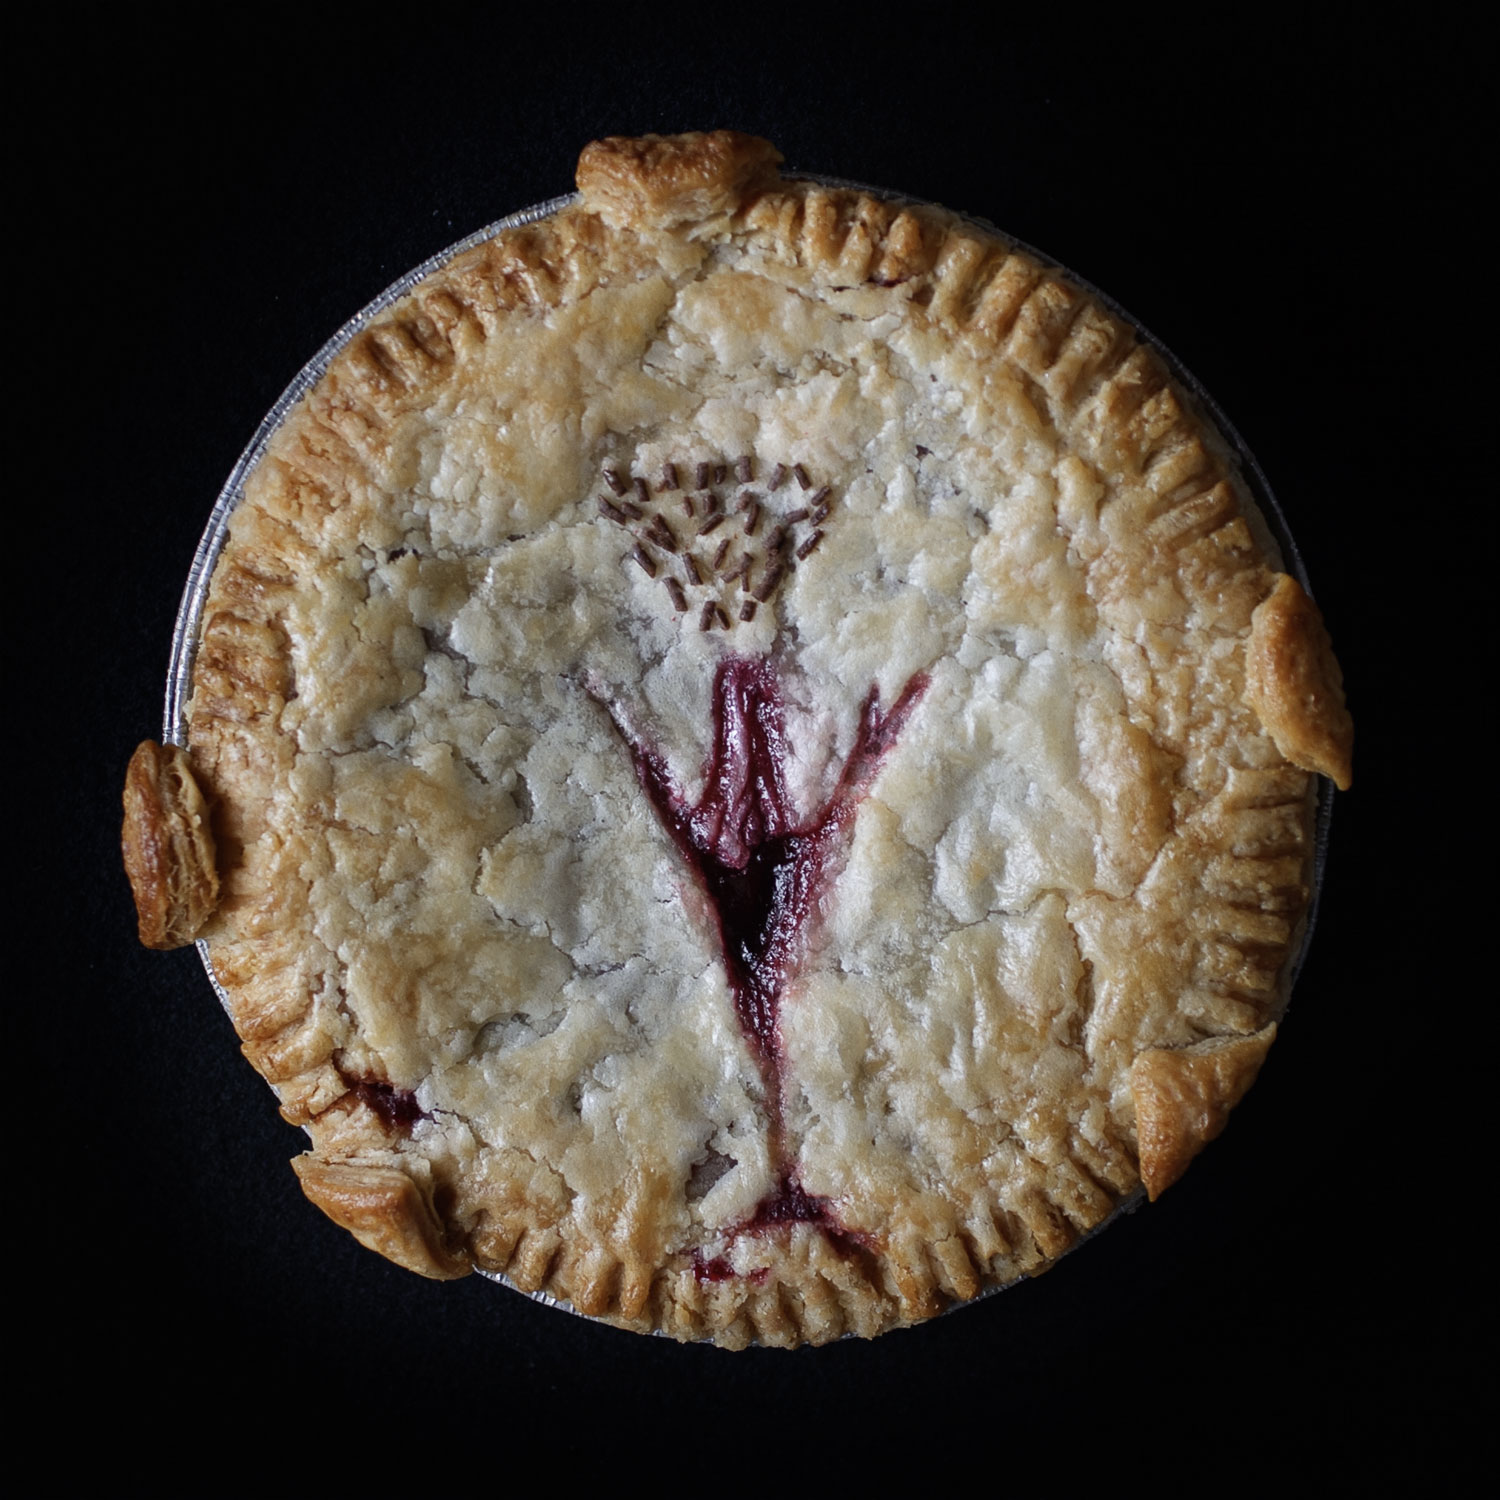 Baked art pie with cherry filling. The pie is sculpted to look like the frontal view of a vulva.